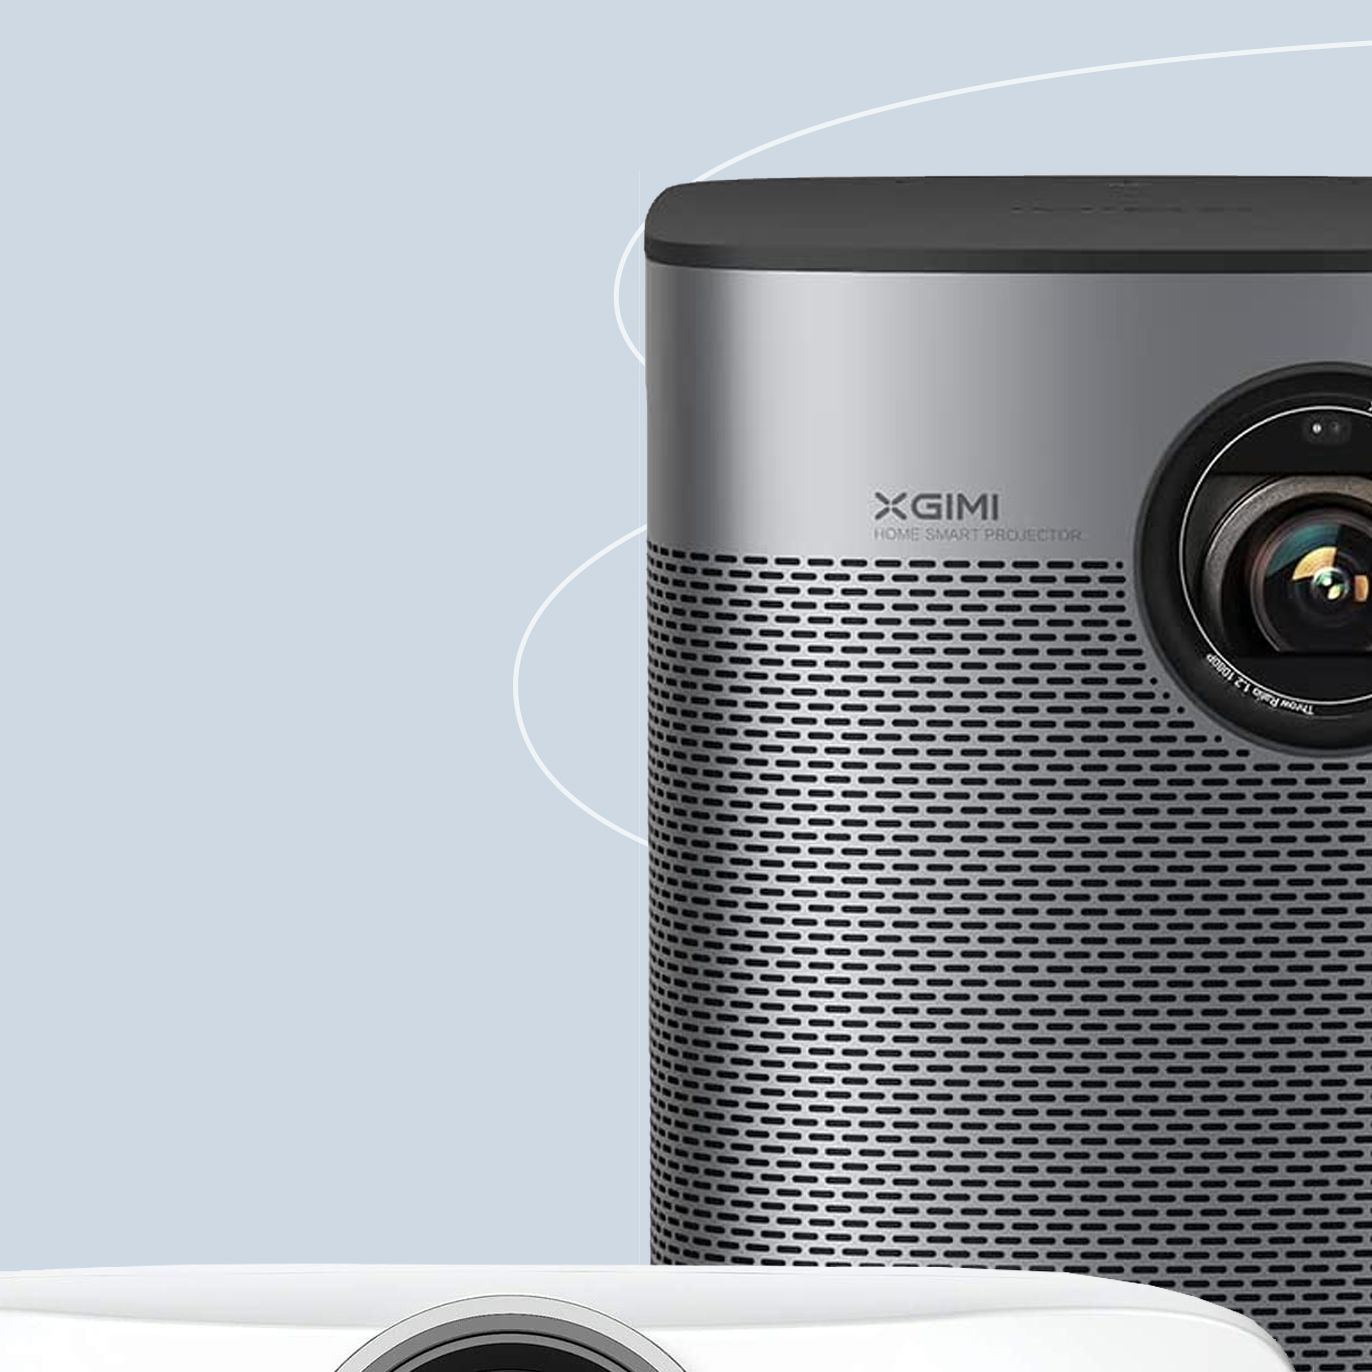 The Best At-Home Projectors According to Esquire Editors